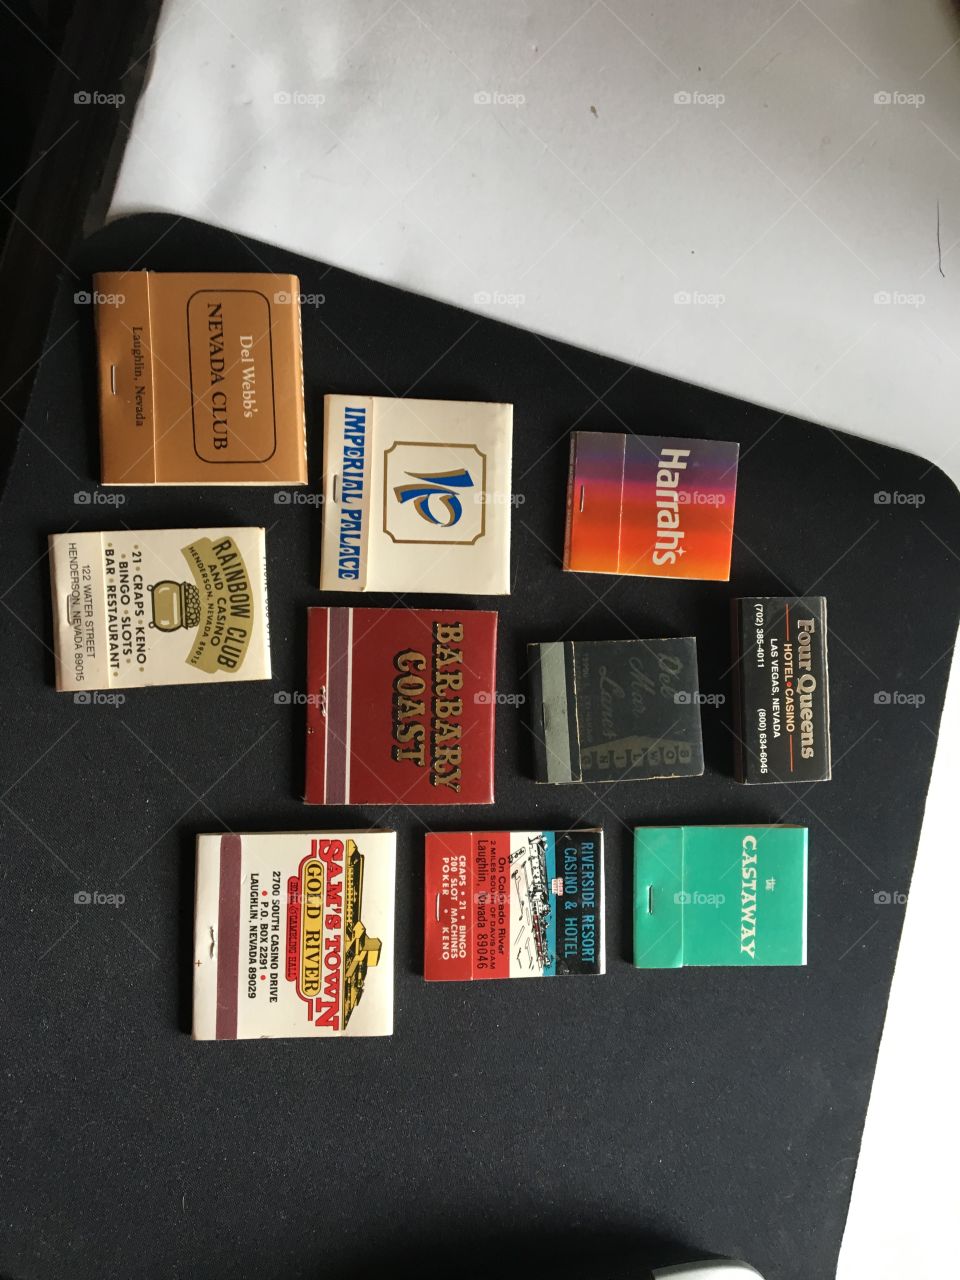 Matchbook collection from Las Vegas